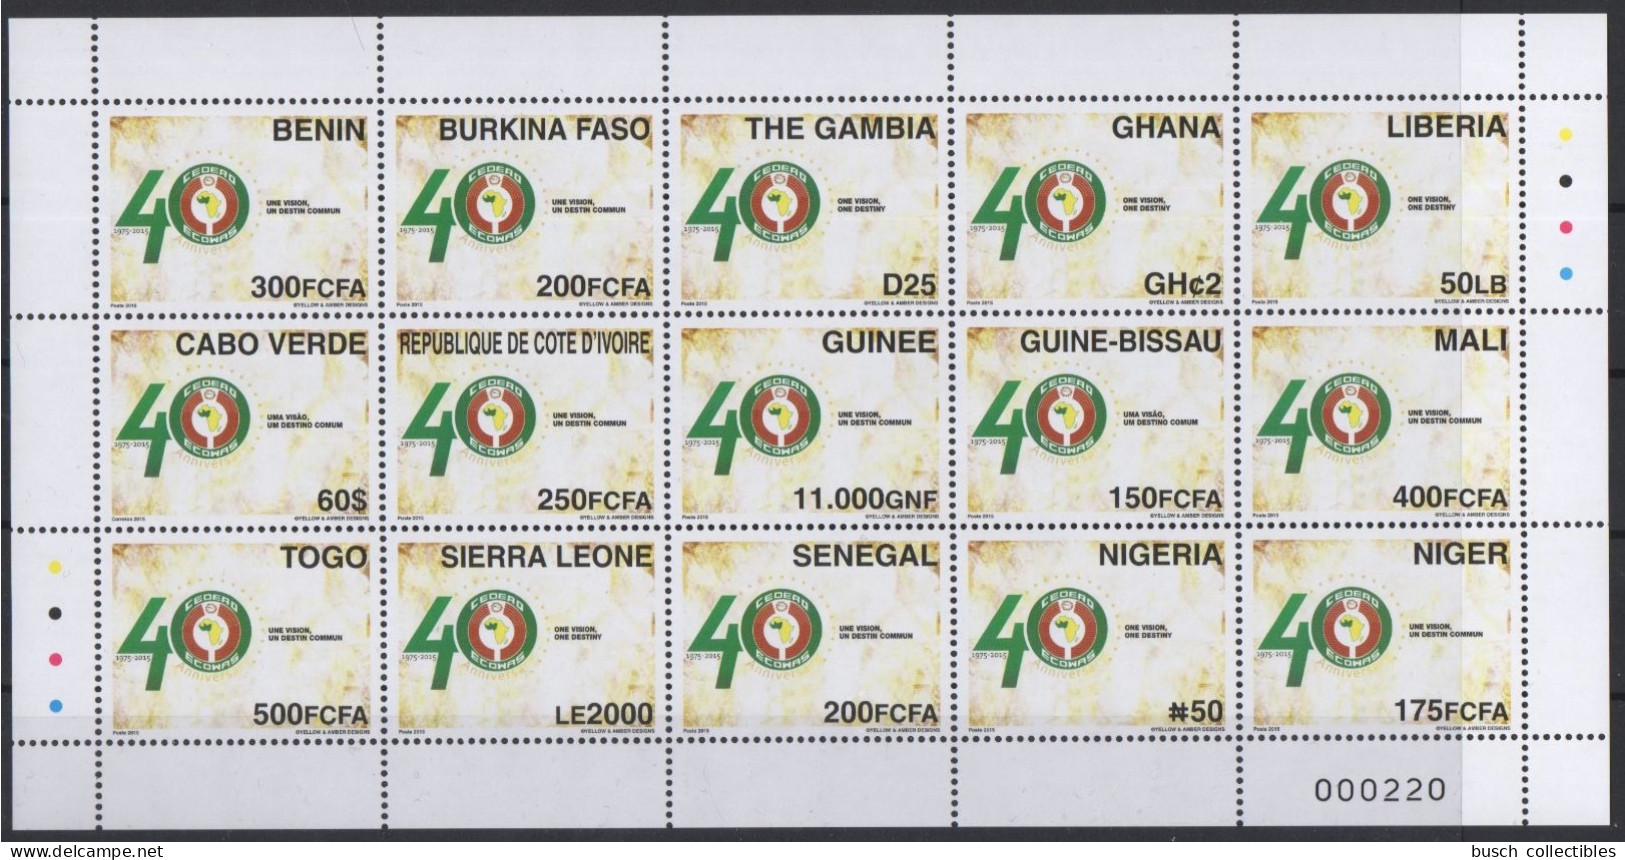 ULTRA RARE Feuille 15 Pays 15 Countries Sheet 15 Länder 2015 Emission Commune Joint Issue CEDEAO ECOWAS 40 Ans 40 Years - Guinea-Bissau